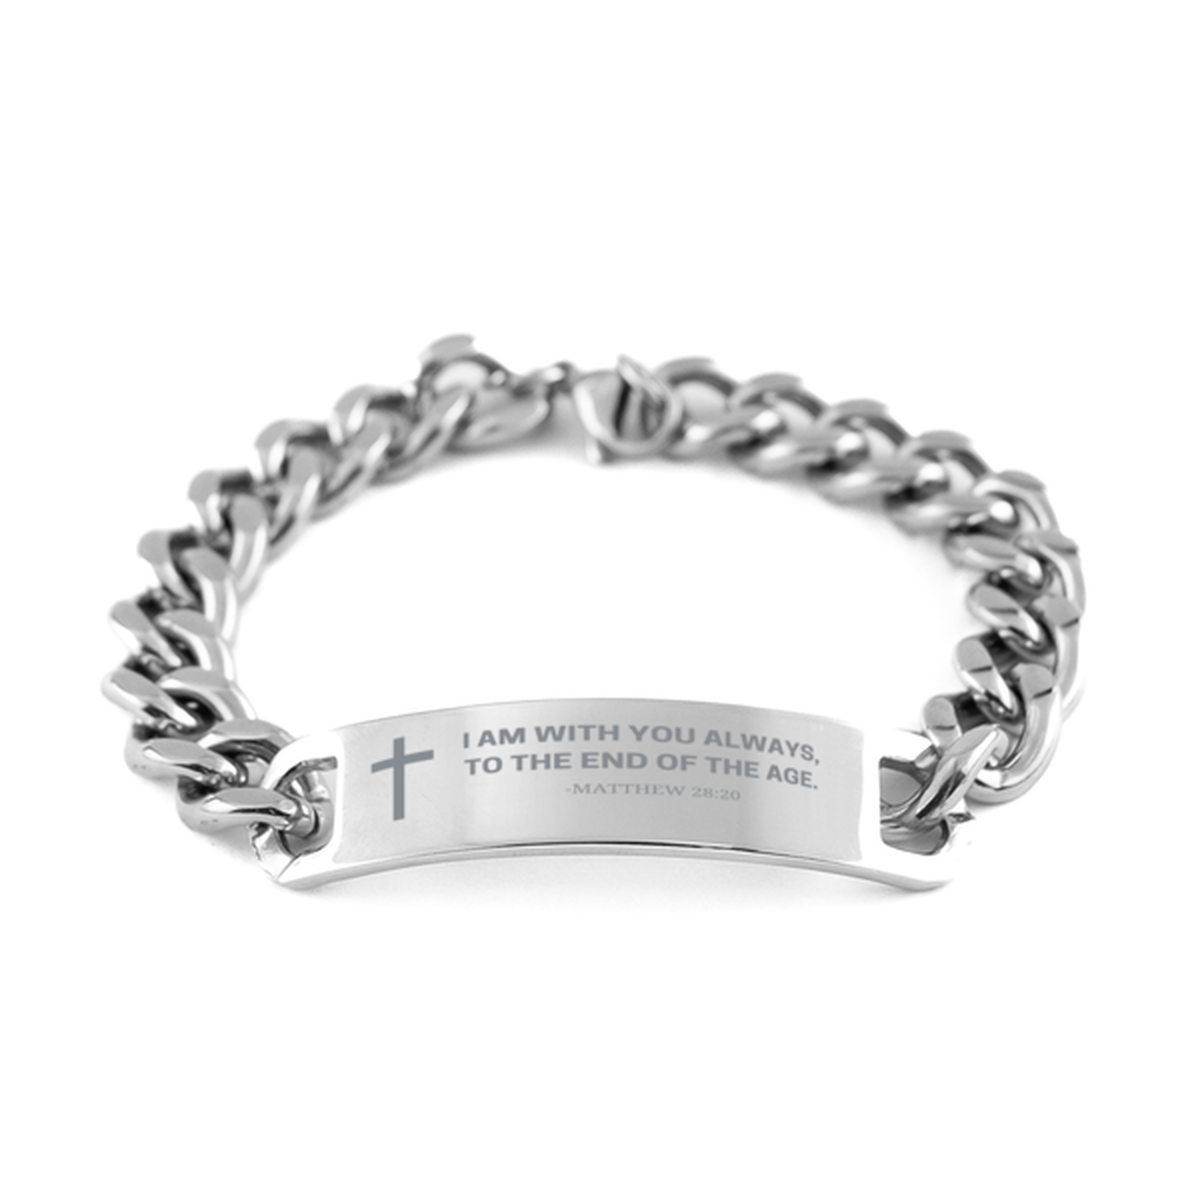 Baptism Gifts For Teenage Boys Girls, Christian Bible Verse Cuban Chain Bracelet, I am with you always, Catholic Confirmation Gifts for Son, Godson, Grandson, Nephew